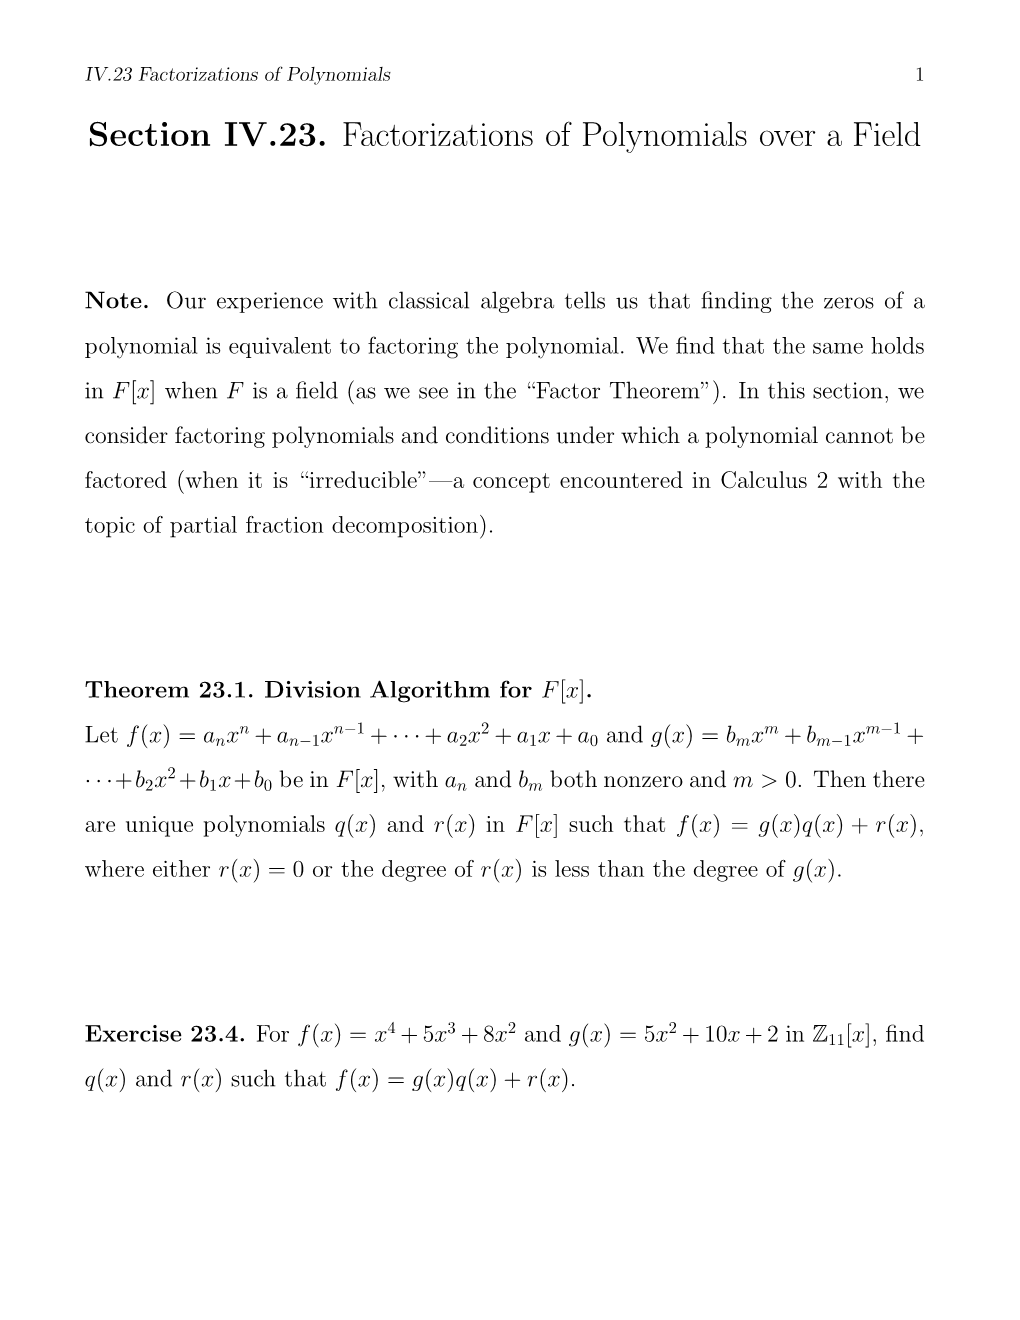 Section IV.23. Factorizations of Polynomials Over a Field